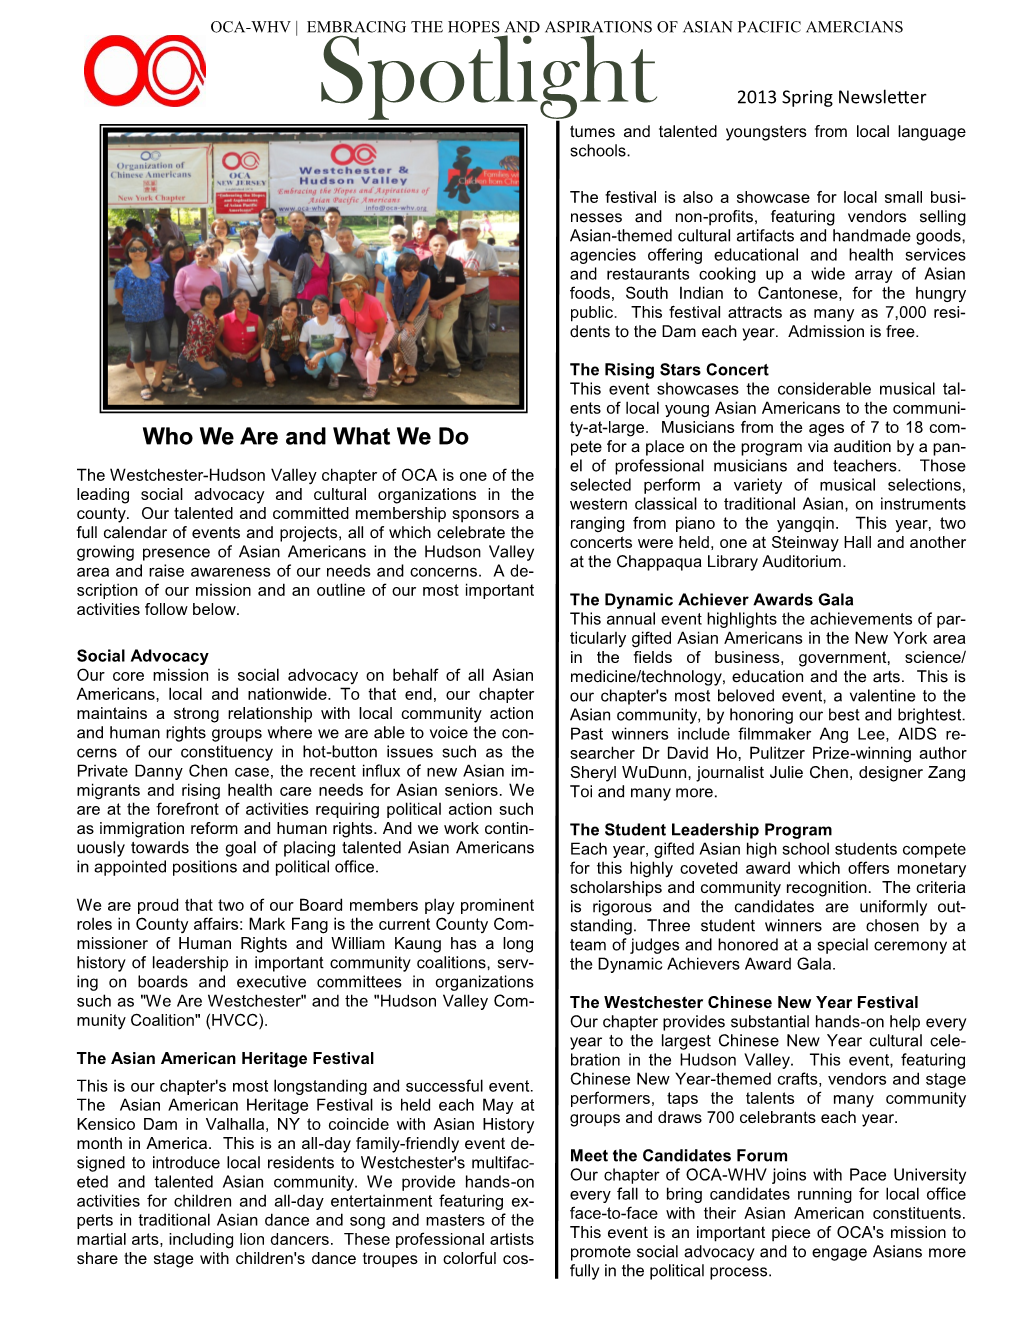 Spotlight 2013 Spring Newsletter Tumes and Talented Youngsters from Local Language Schools